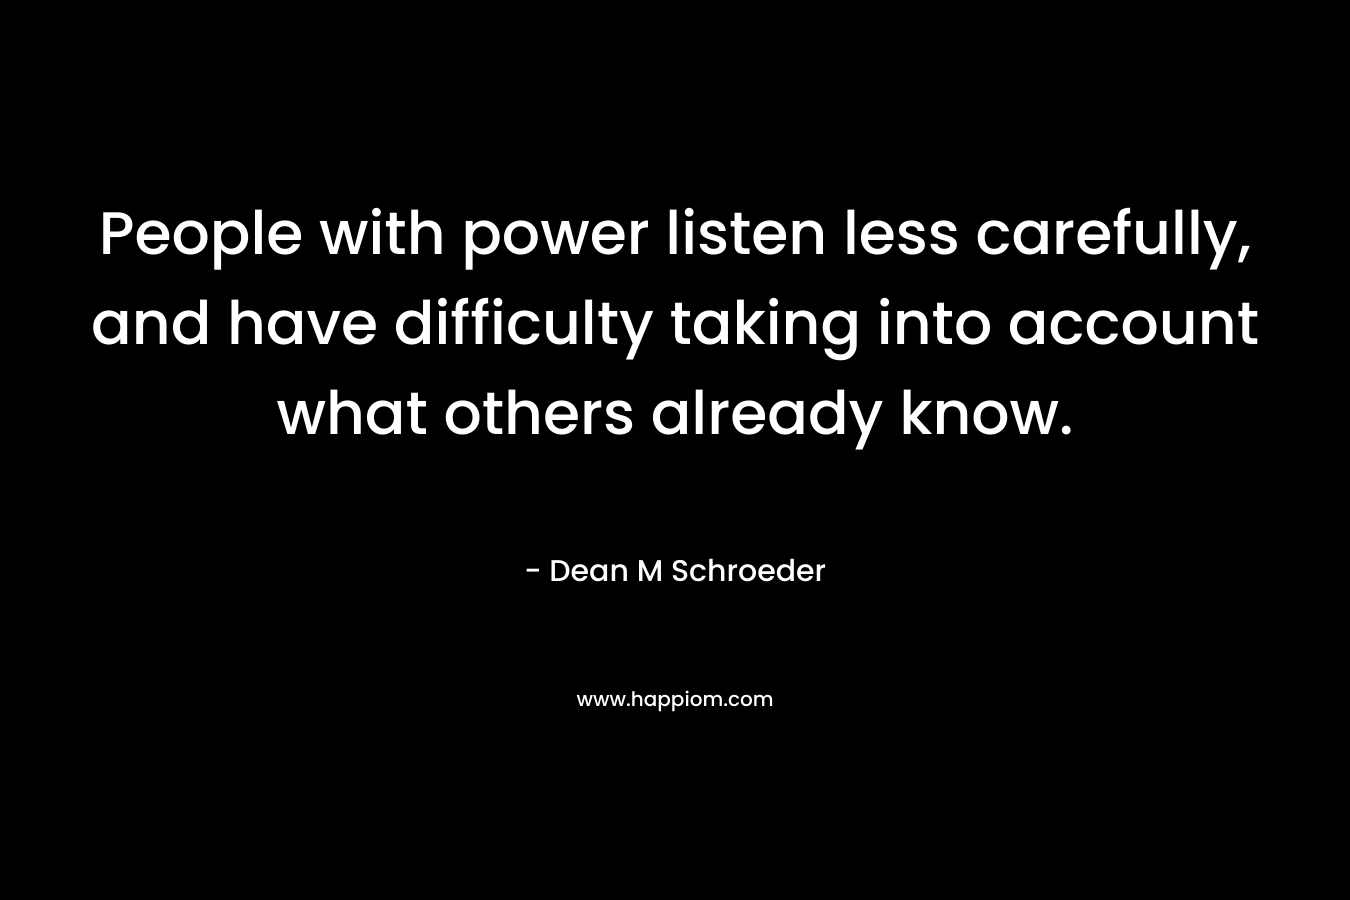 People with power listen less carefully, and have difficulty taking into account what others already know. – Dean M Schroeder